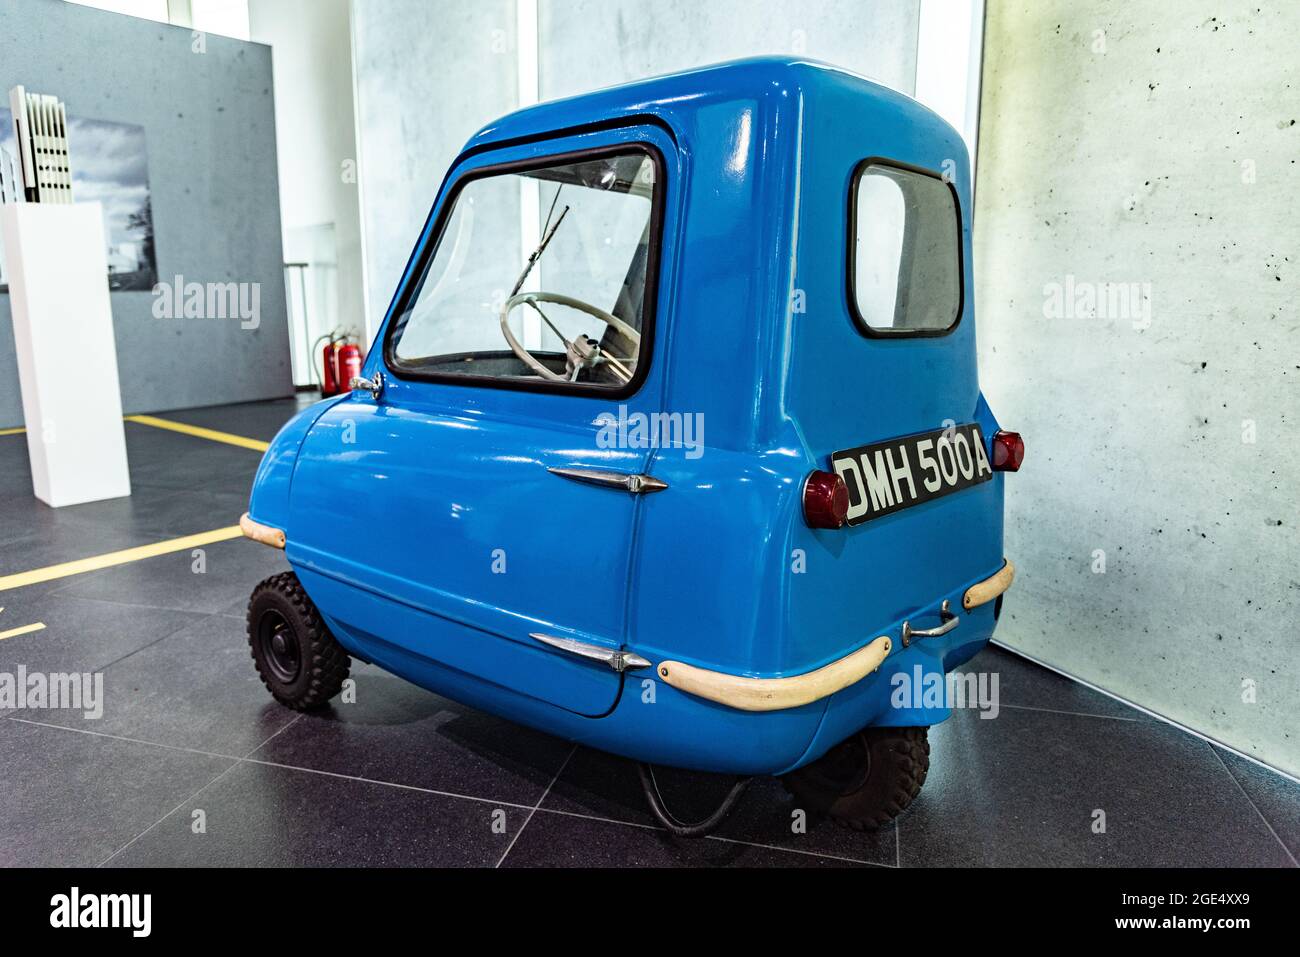 The Peel P50 is the smallest ever produced car in the world. The motor was from a DKW motorbike. From Audi Museum Mobile. Stock Photo